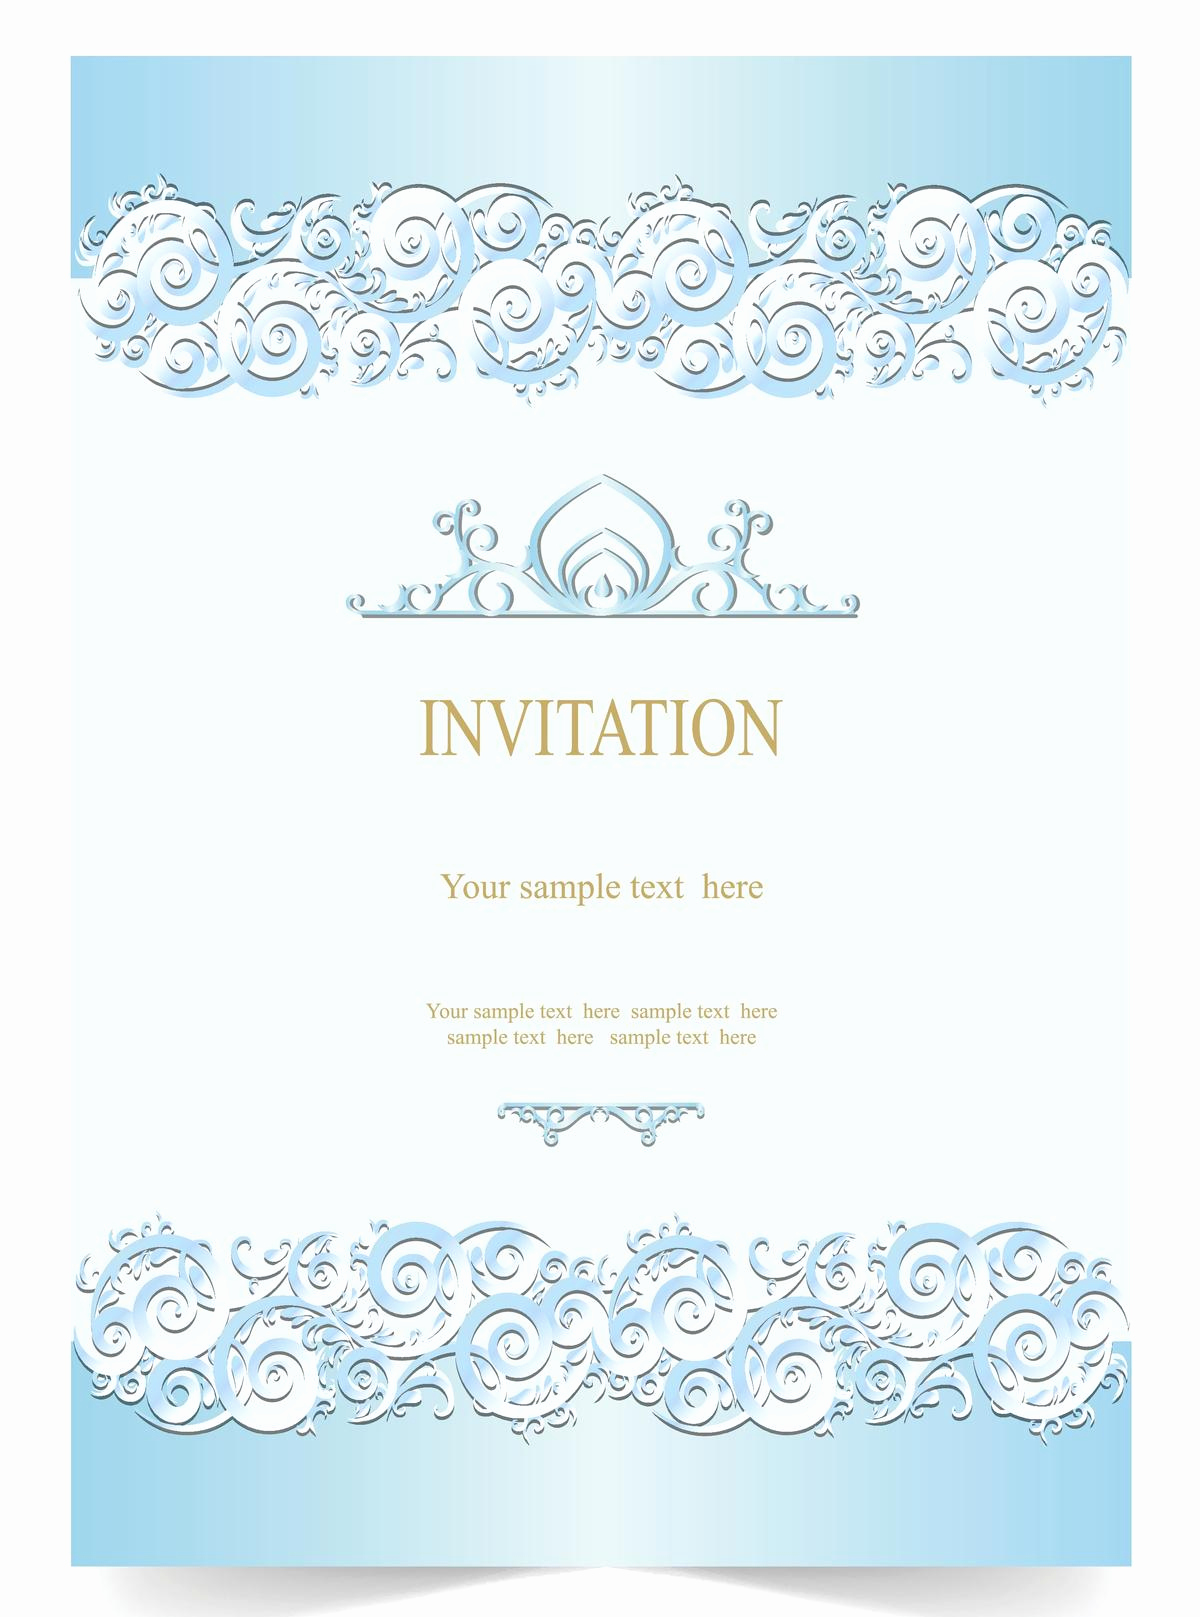 Formal Invitation to Follow Awesome Simple Etiquette Guidelines to Write formal Invitation Wording